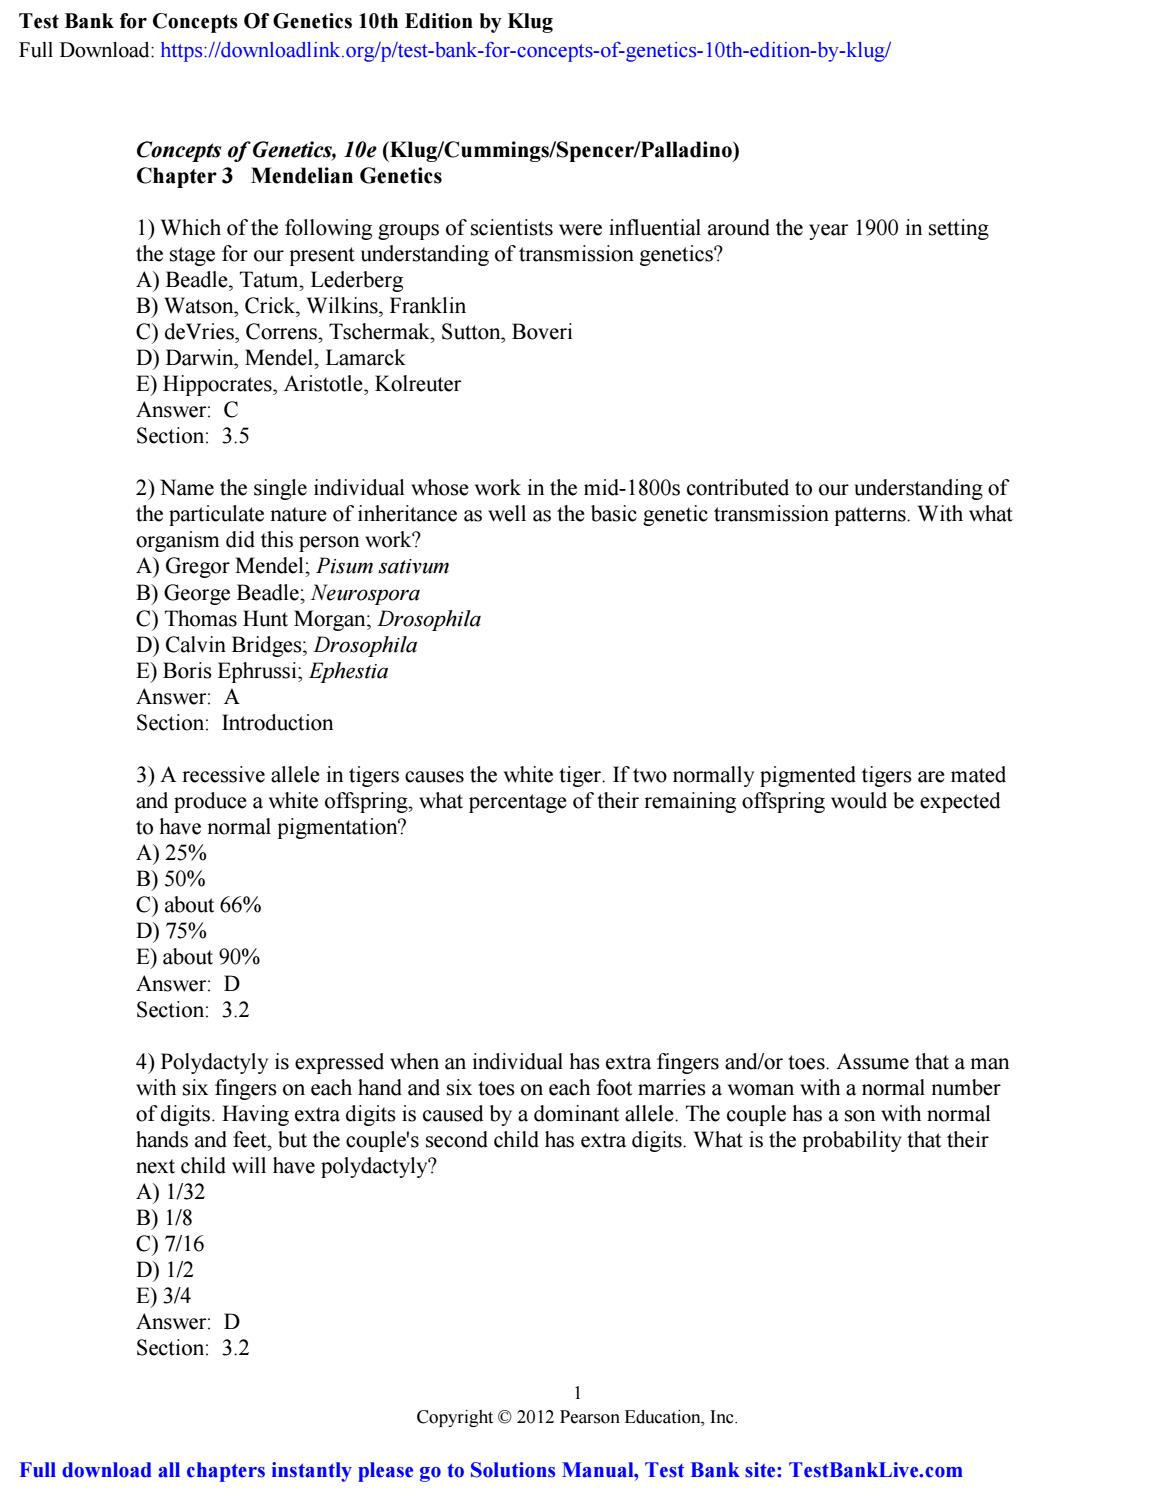 Mendelian Genetics Worksheet Answer Key Test Bank for Concepts Genetics 10th Edition by Klug by